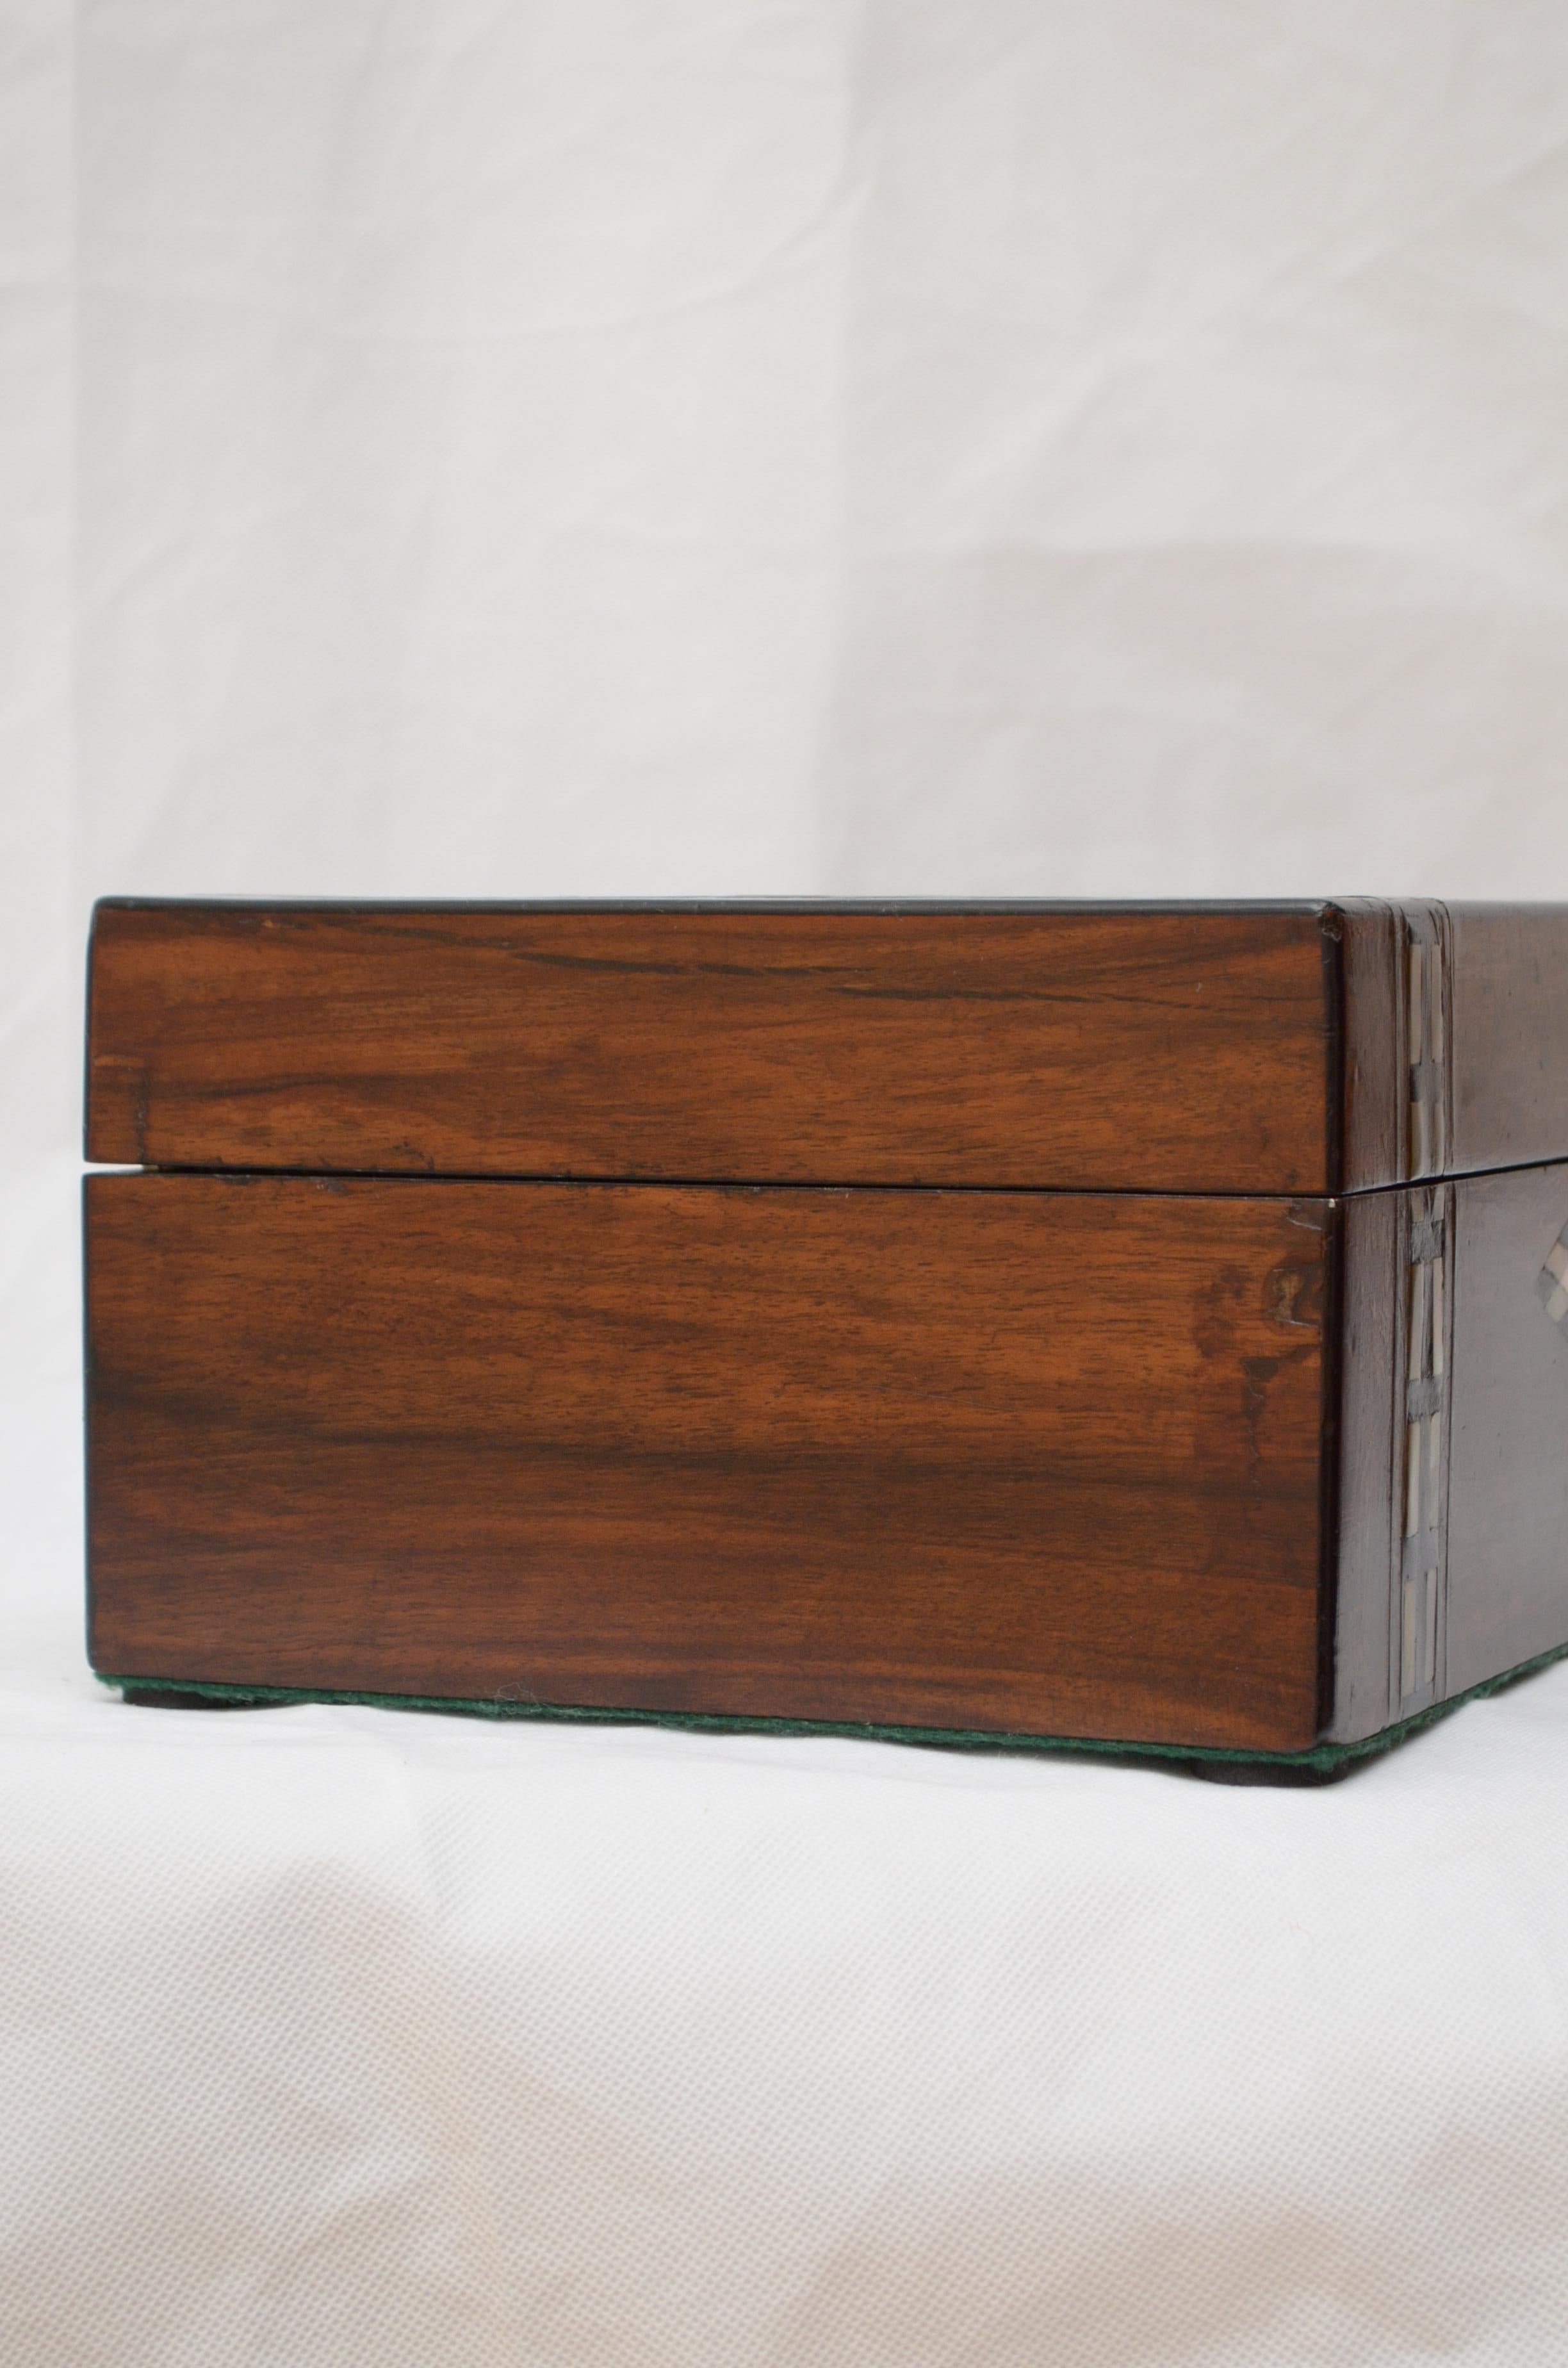 Victorian Walnut and Inlaid Jewelry Box Sewing Box with Tray 7